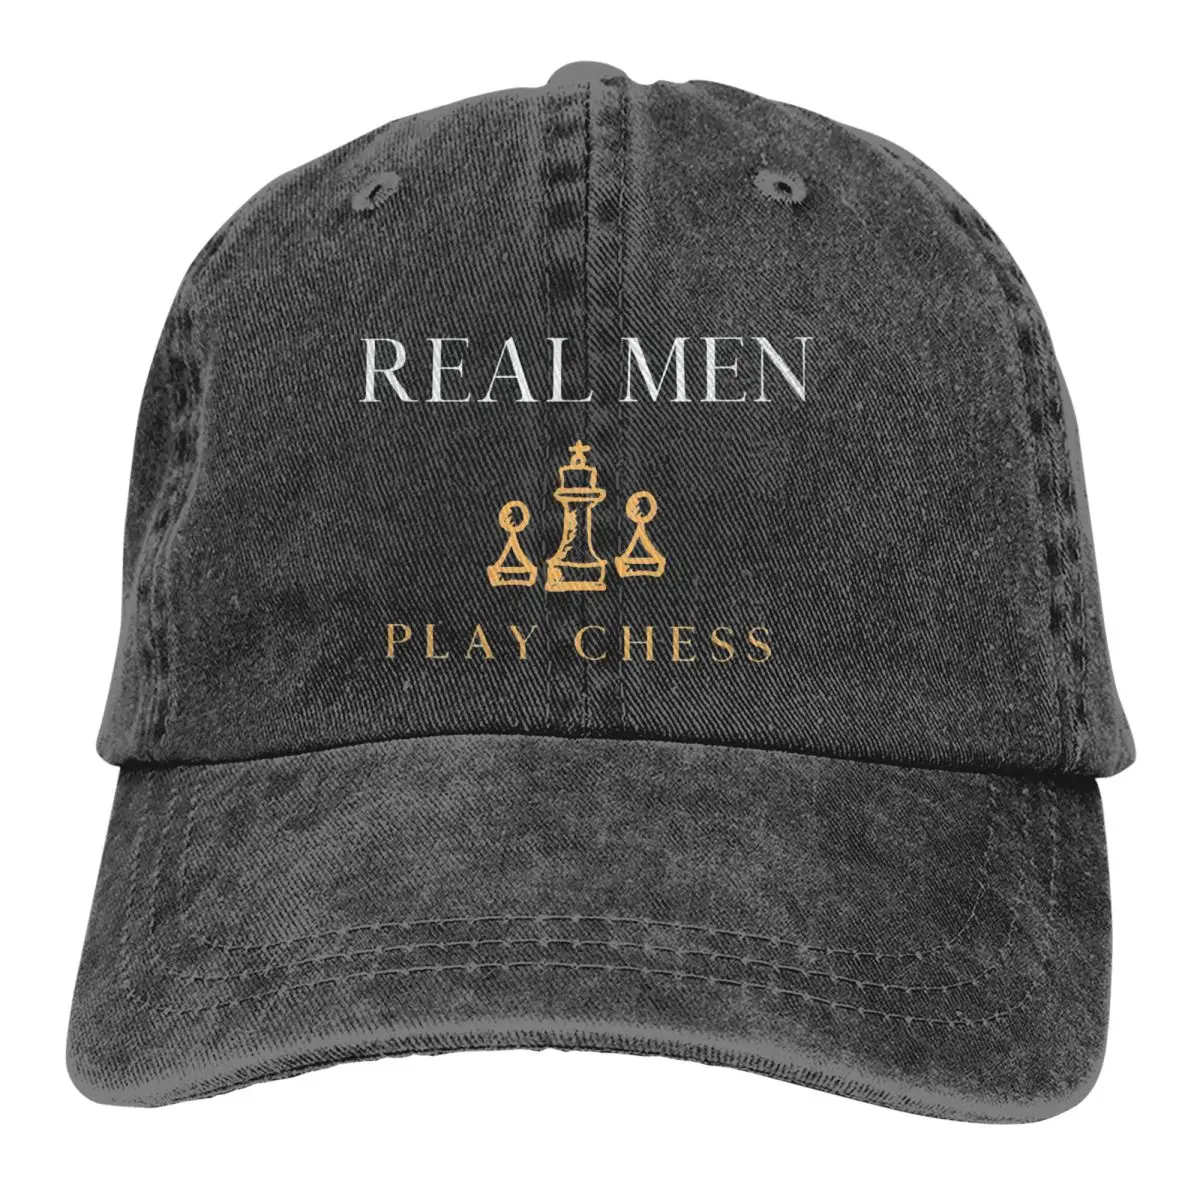 

Real Men Play Baseball Cap Men Hats Women Visor Protection Snapback Chess A Game to Help the Intellect Caps